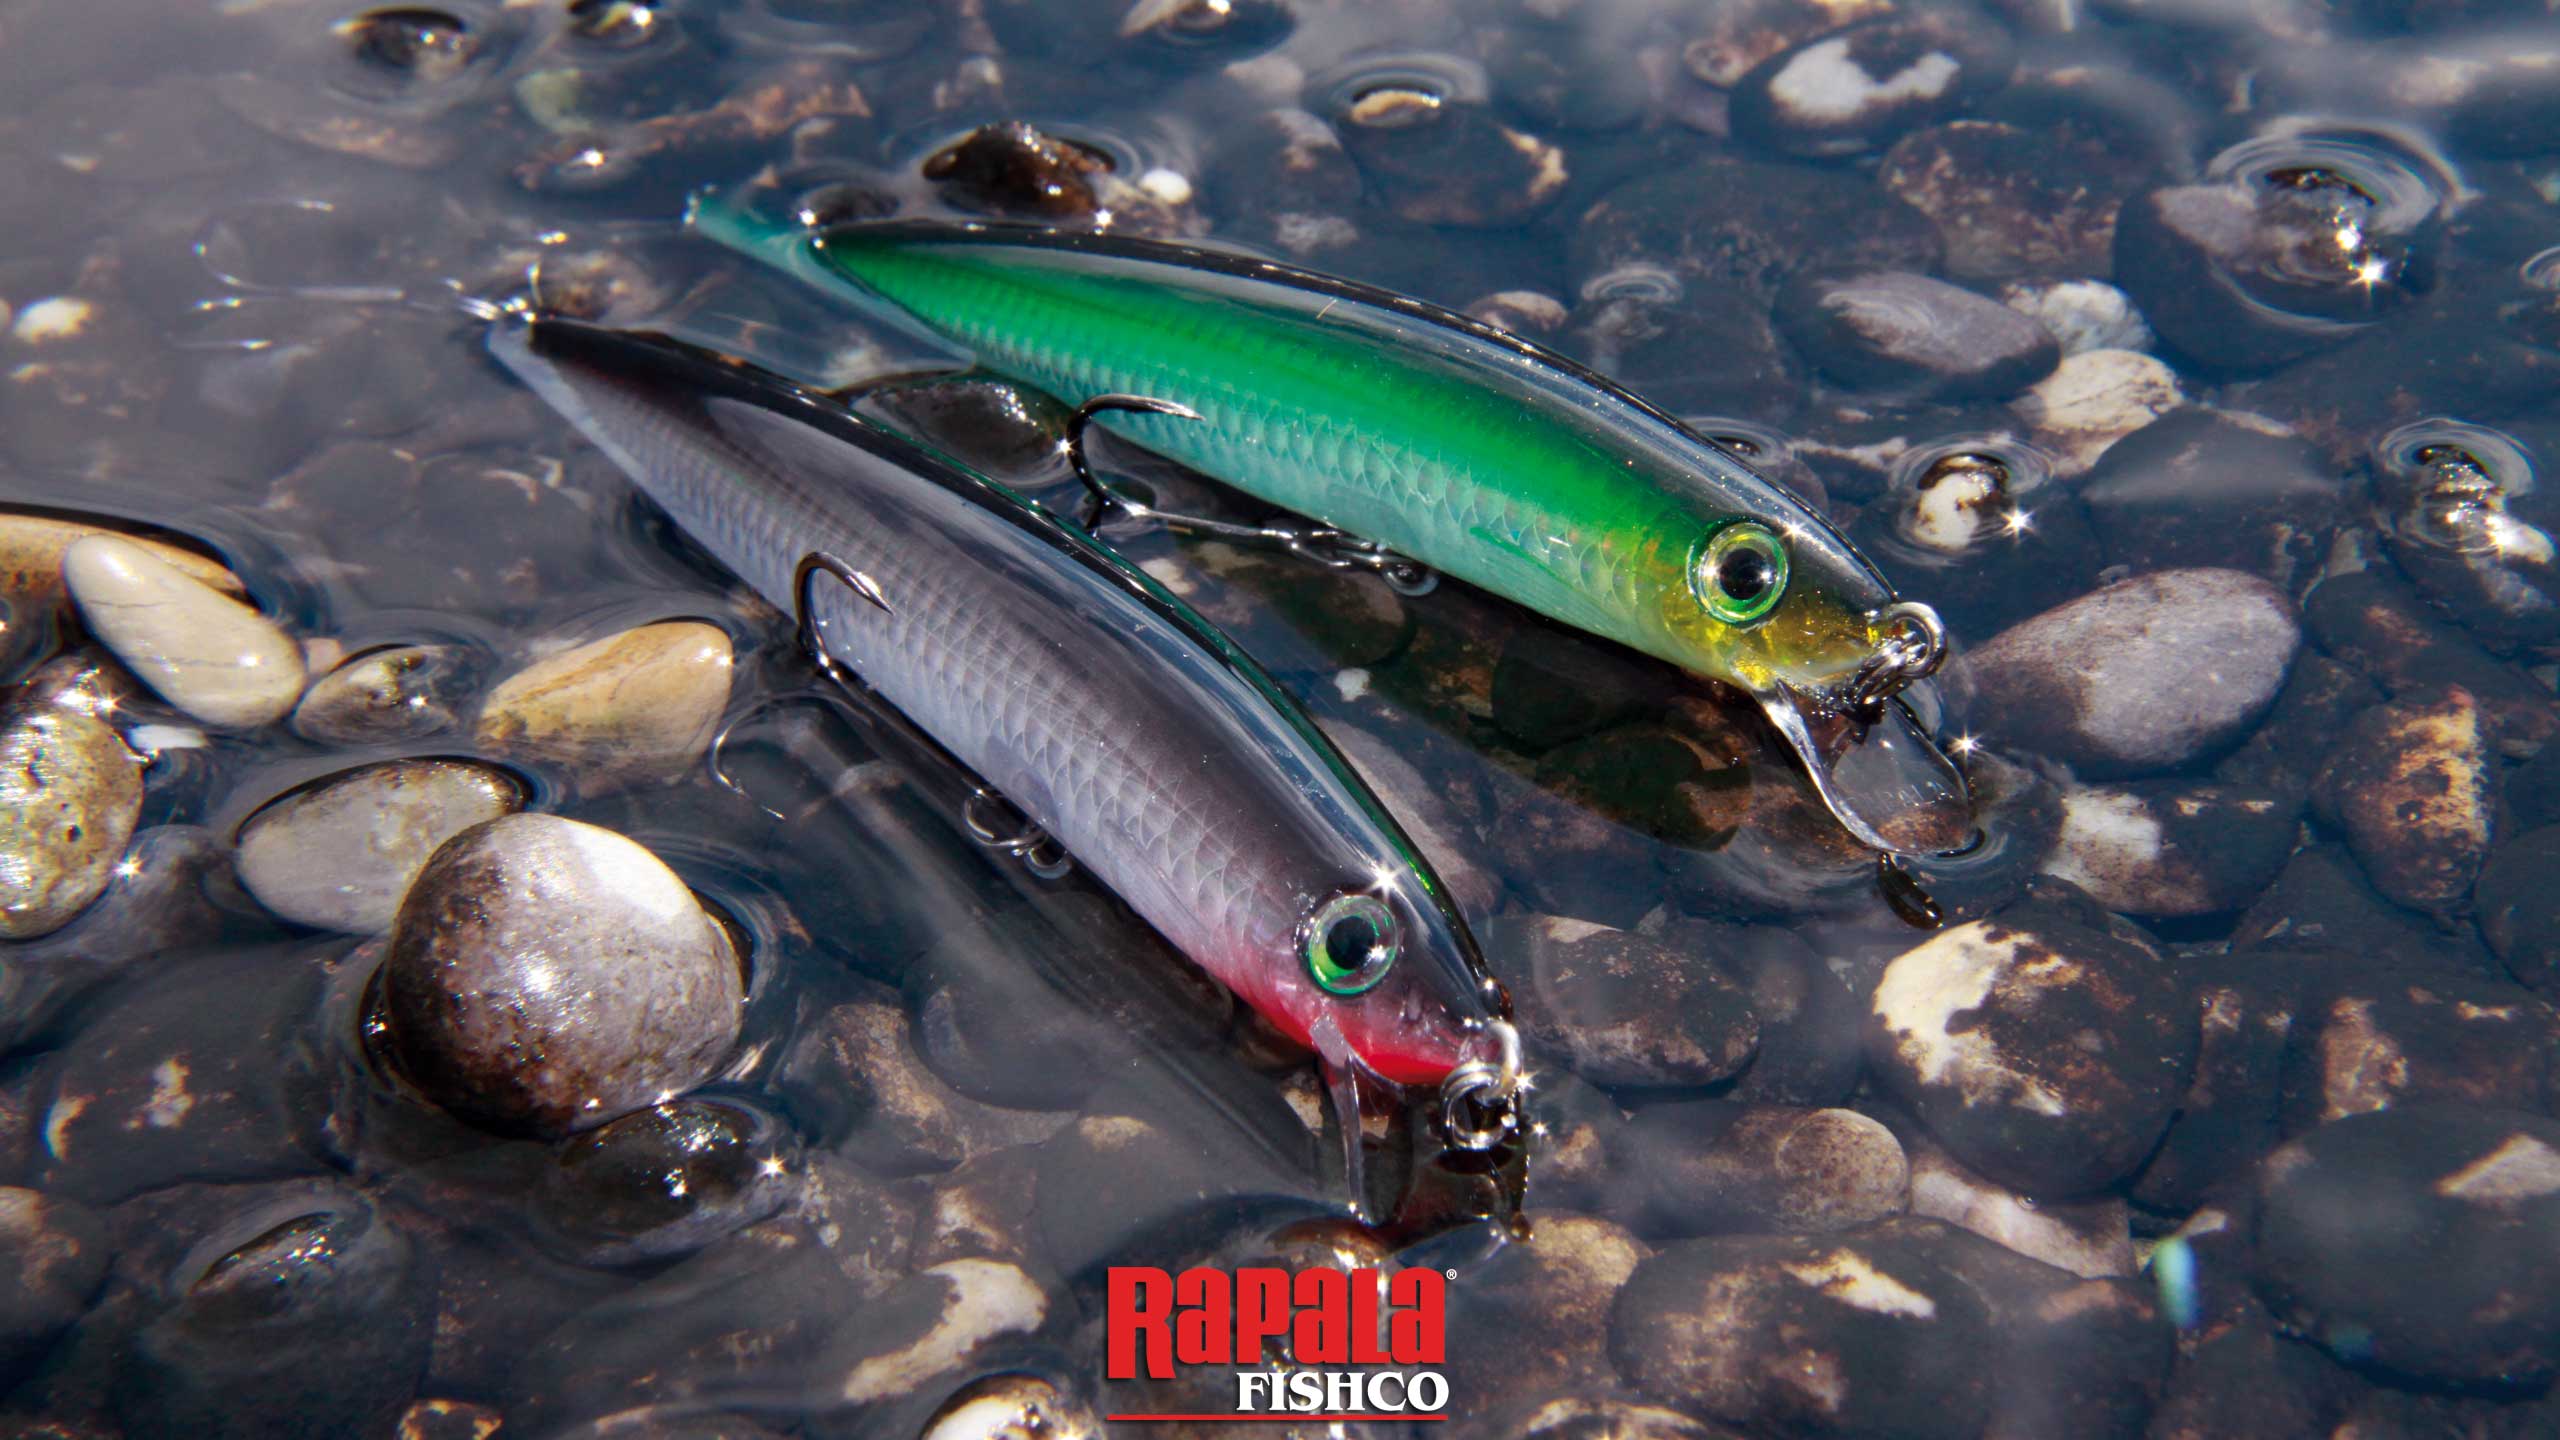 🔥 Download Rapala Logo Wallpaper Buys Dynamite Baits For by